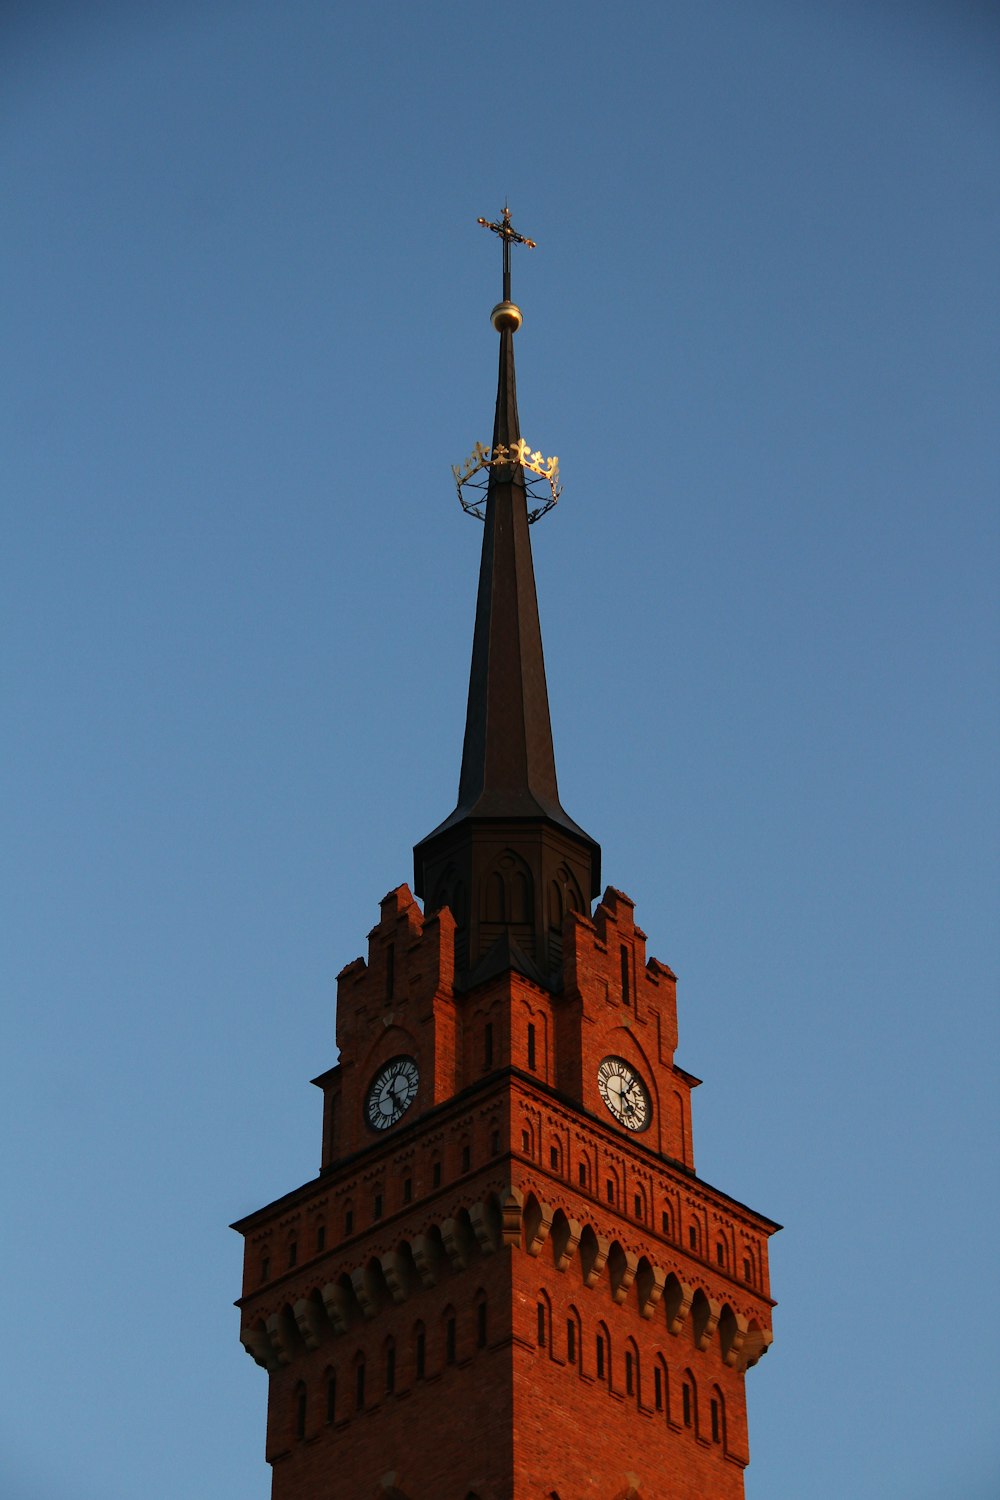 a tall clock tower with a weather vane on top